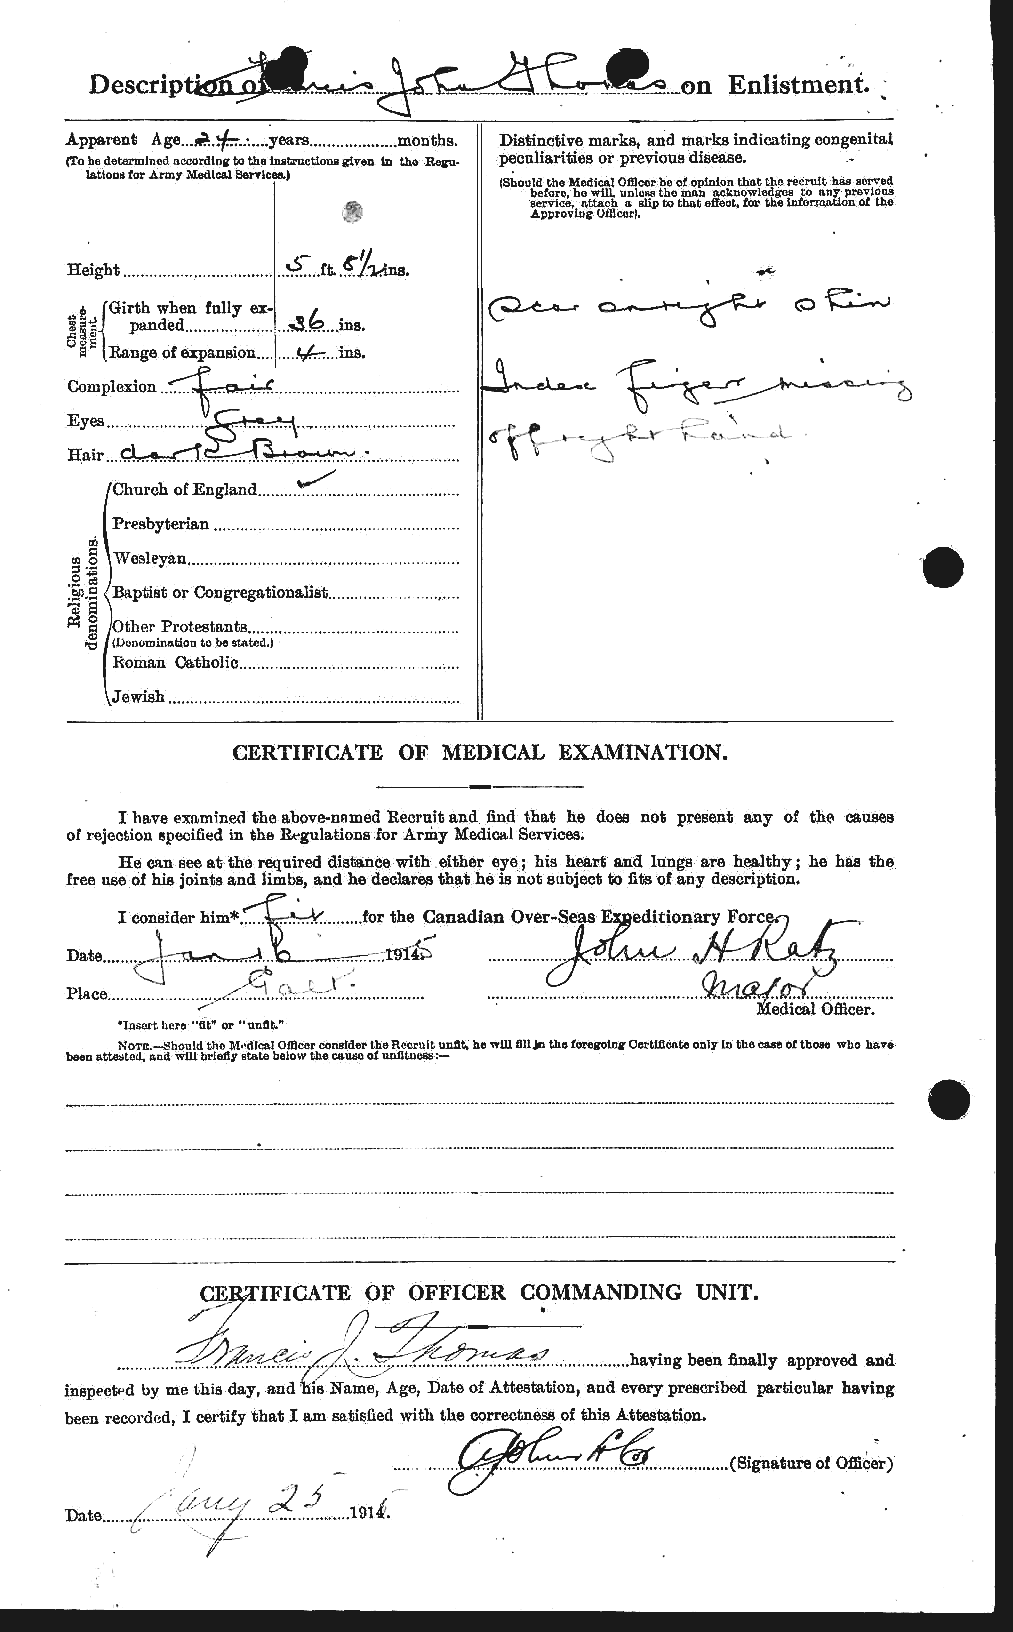 Personnel Records of the First World War - CEF 631582b